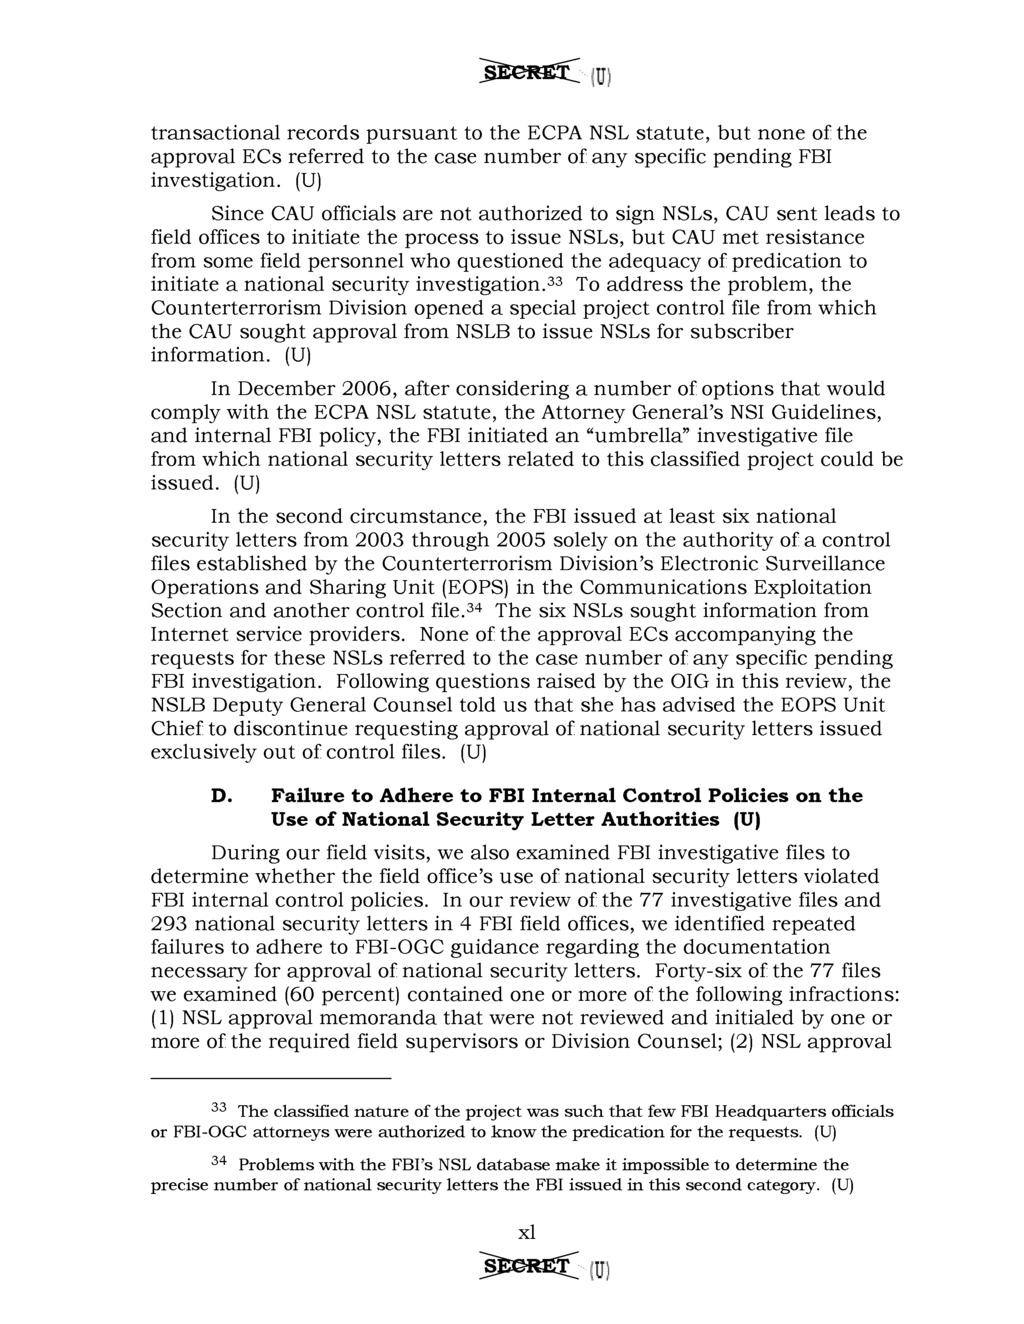 transactional records pursuant to the ECPA NSL statute, but none of the approval ECs referred to the case number of any specific pending FBI investigation.